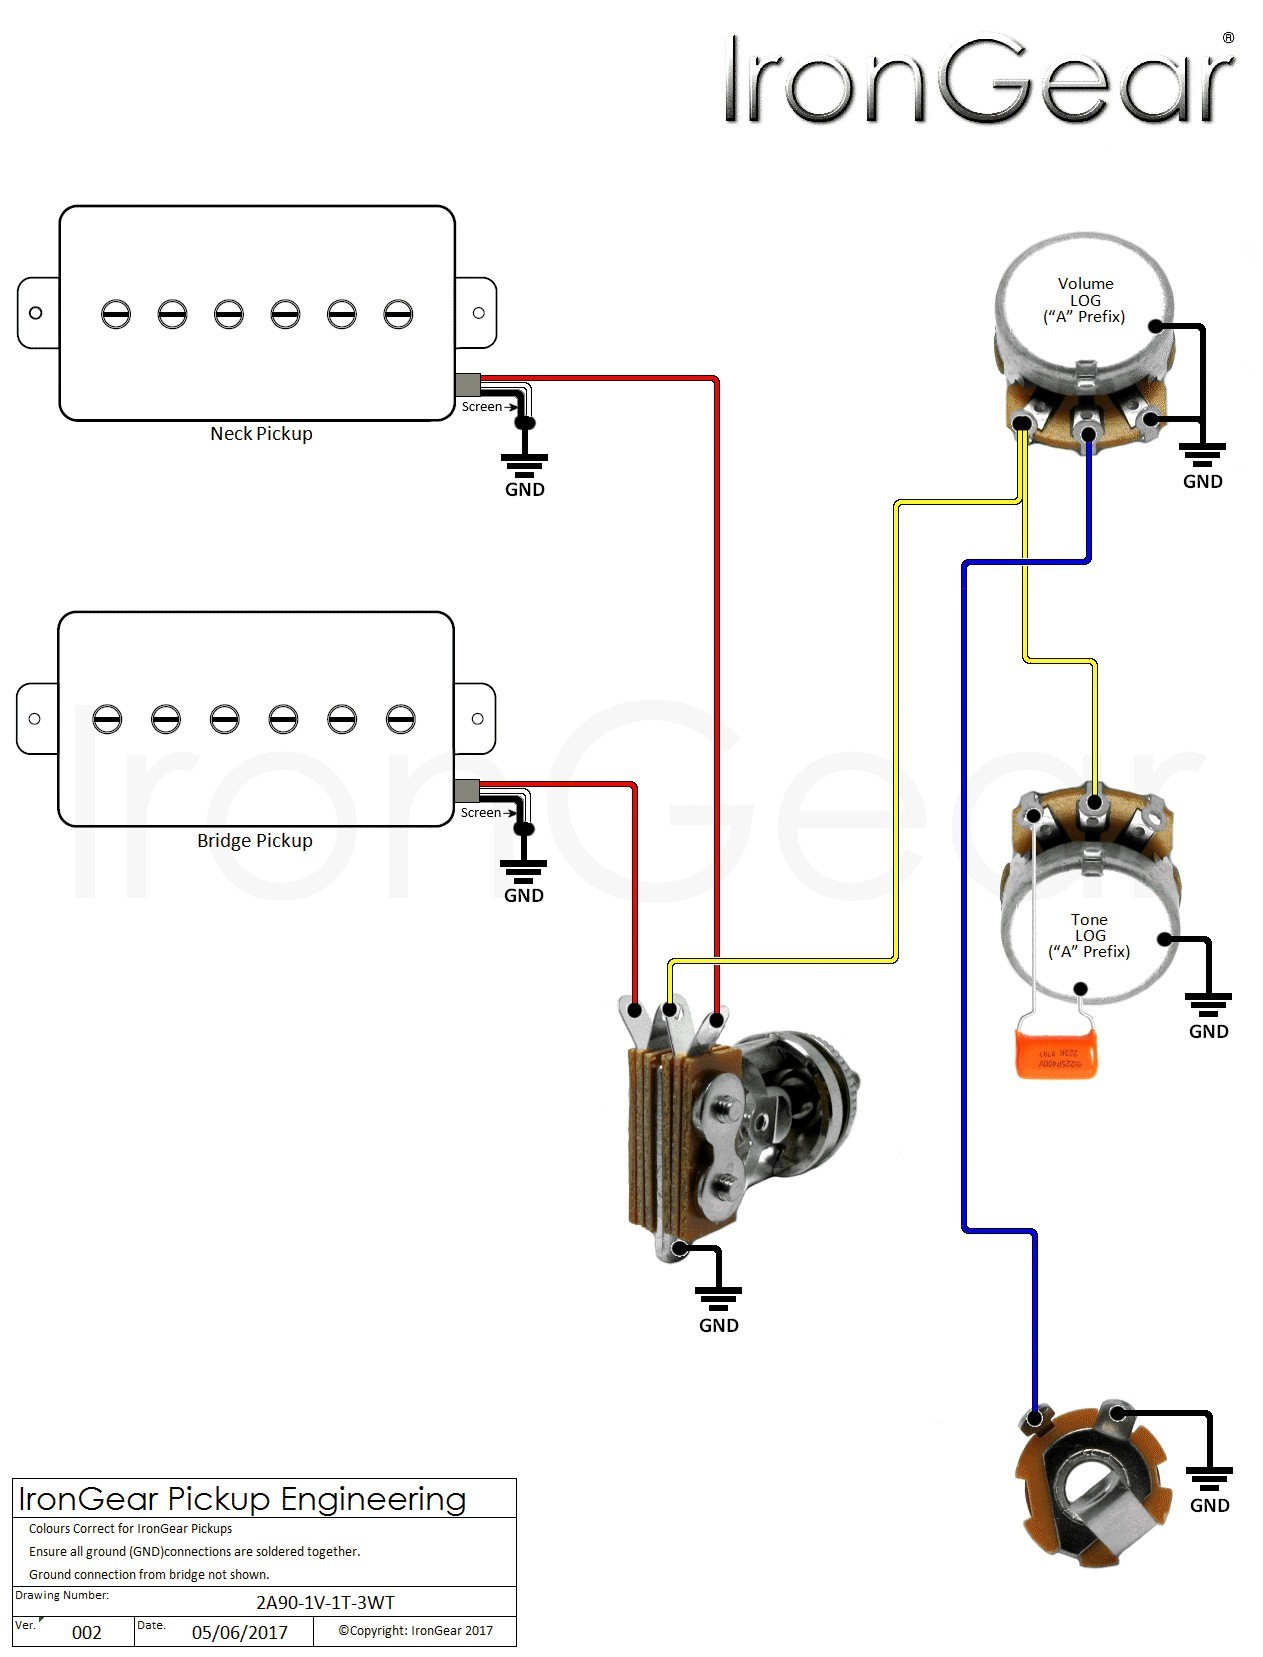 Wiring Diagram For A Guitar New Wiring Diagram For Les Paul Guitar Valid 3 Humbucker Wiring Diagram